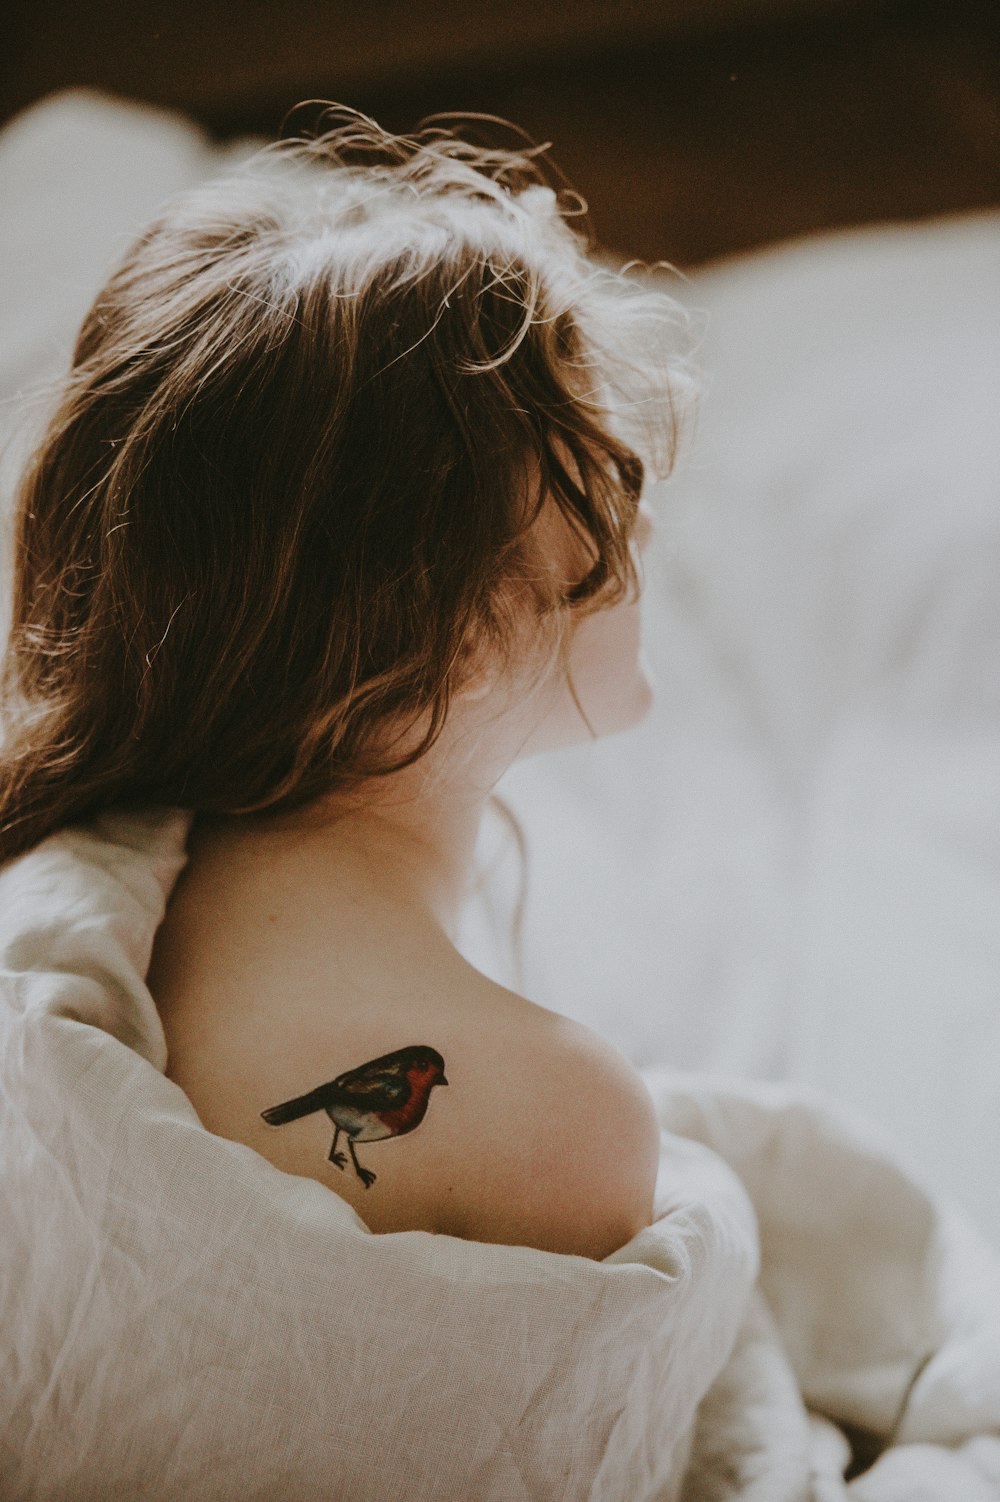 woman with bird tattoo in shoulder laying on white surface